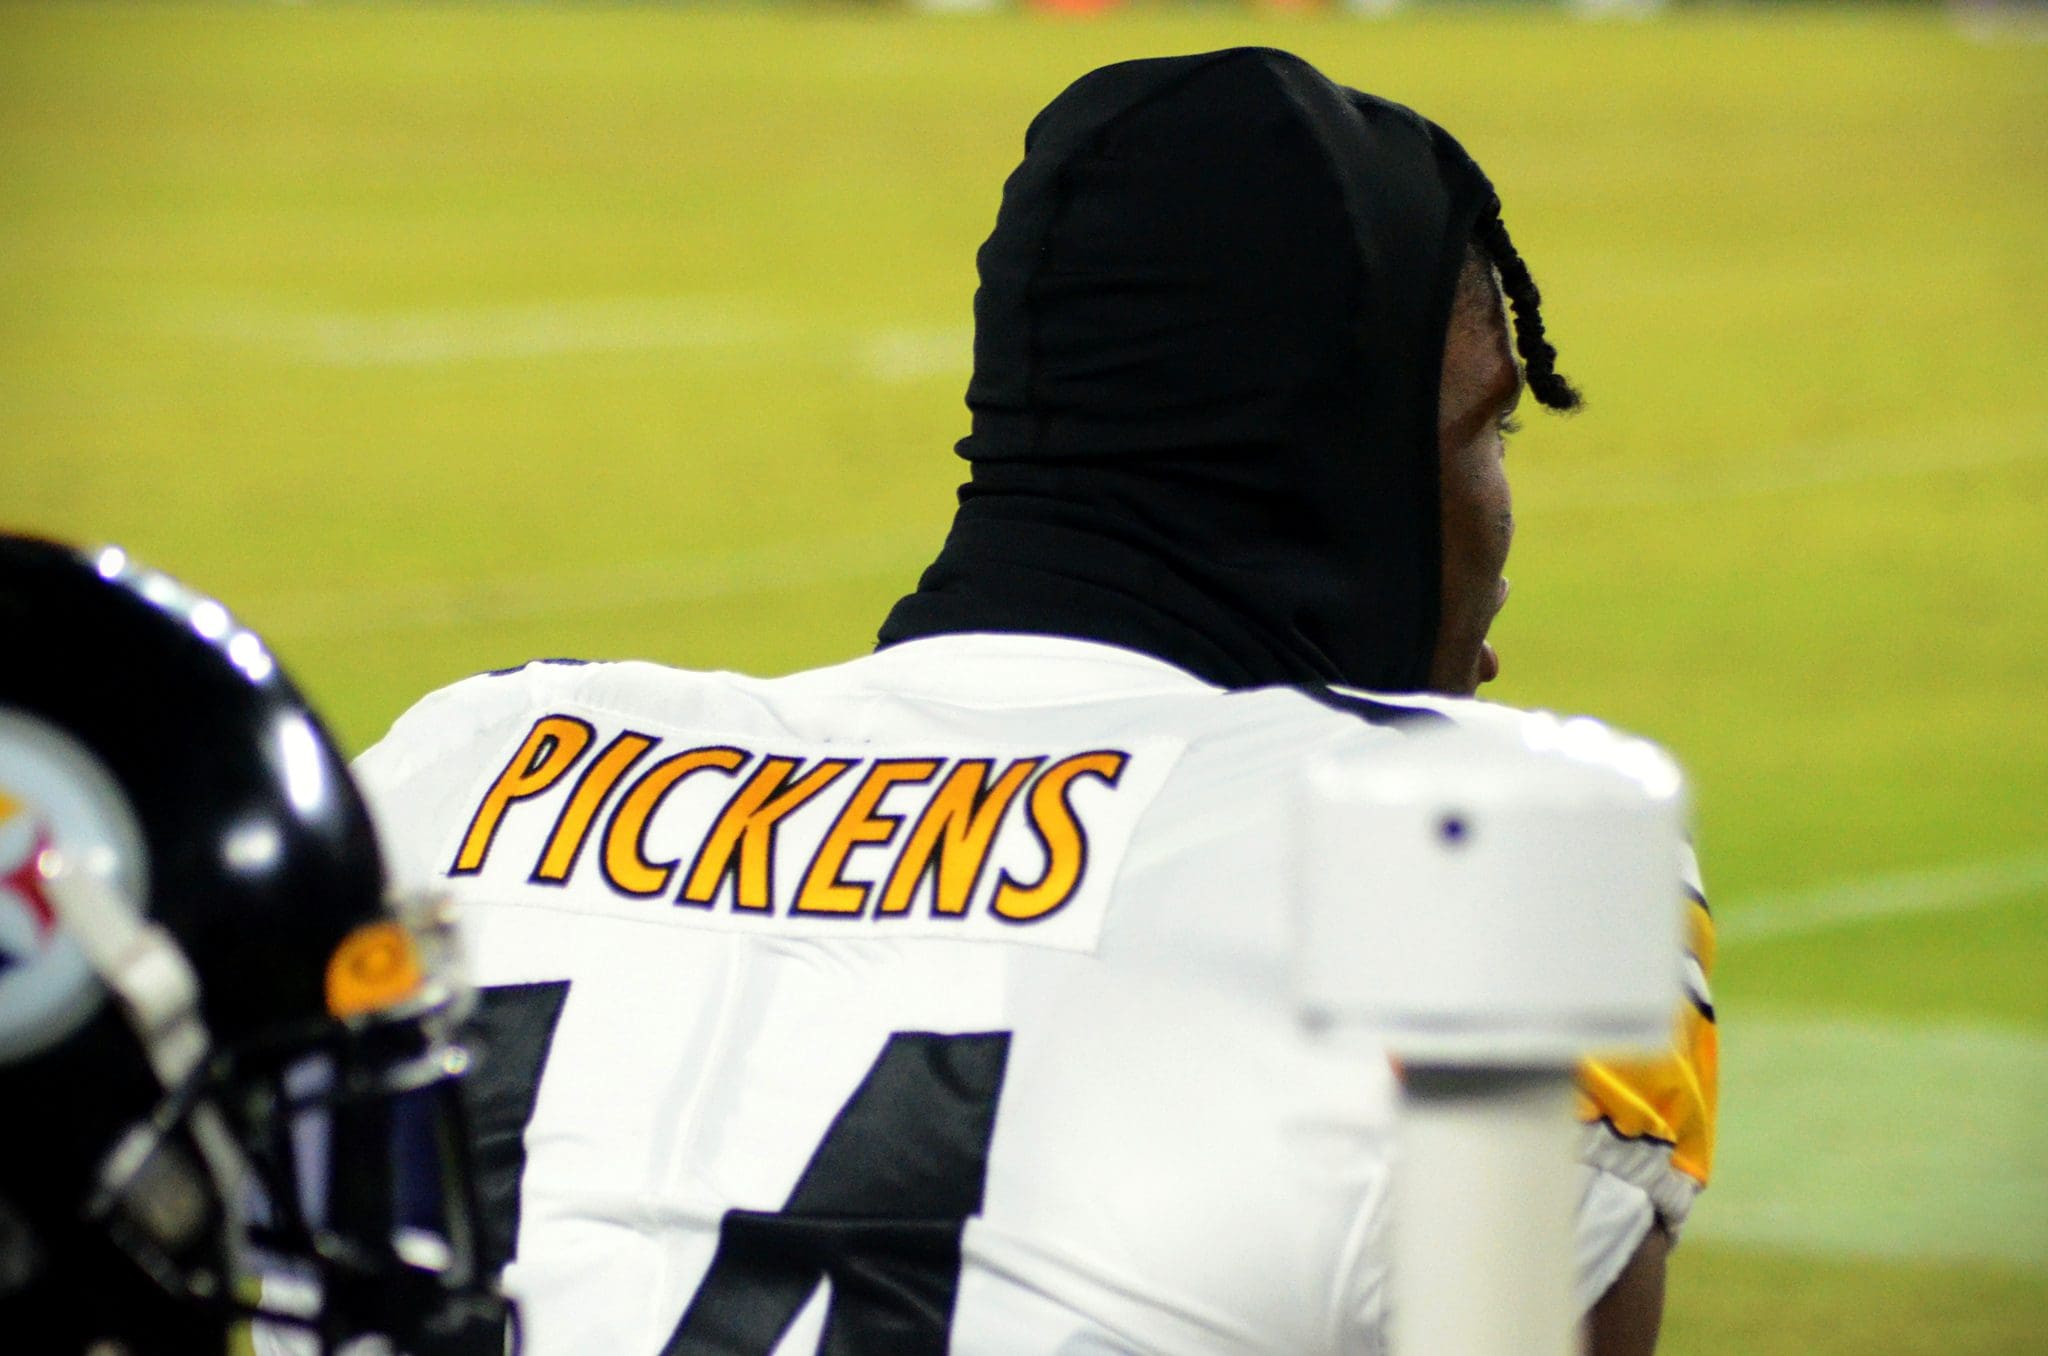 George Pickens looks on as the Steelers face the Ravens on Jan. 1, 2022 in Baltimore. (Mitchell Northam / Steelers Now)